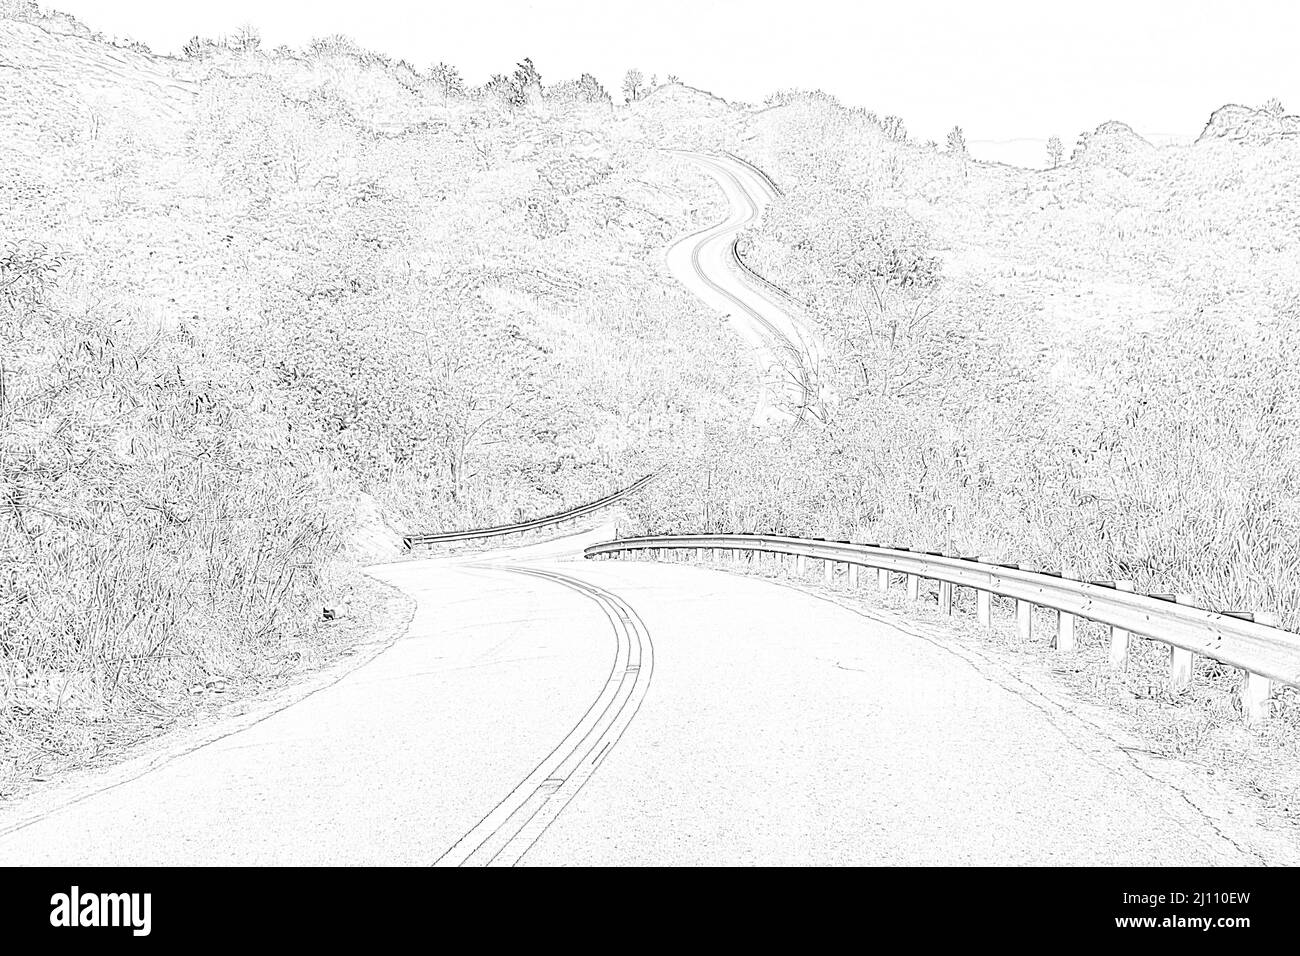 2,397 Winding Road Drawing Images, Stock Photos & Vectors | Shutterstock